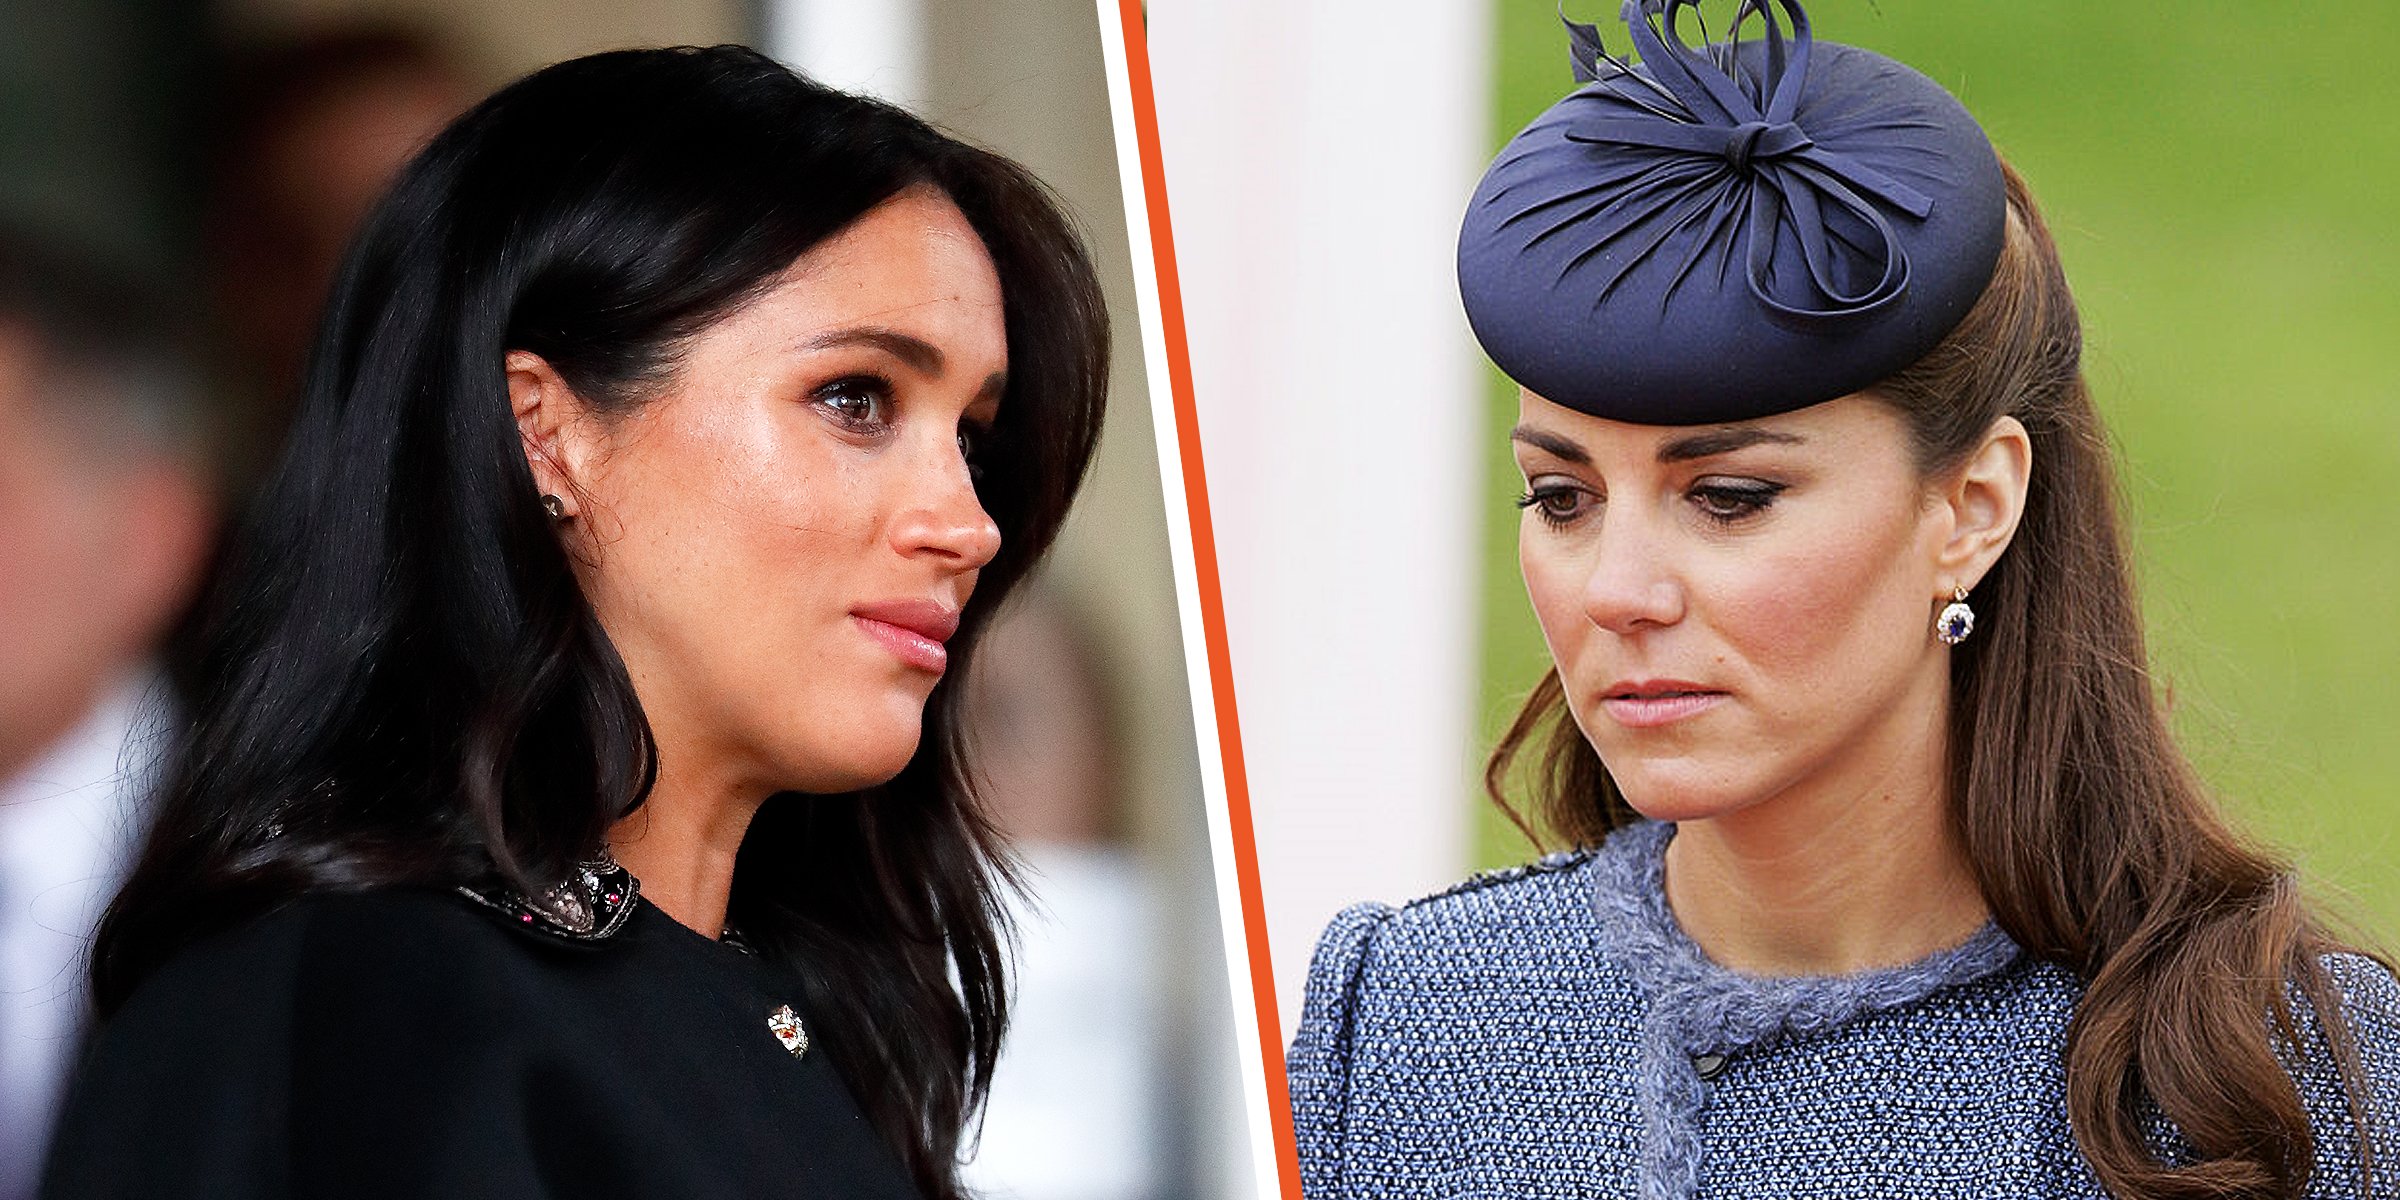 Duchess Meghan, 2019 | Princess Kate, 2012 | Source: Getty Images